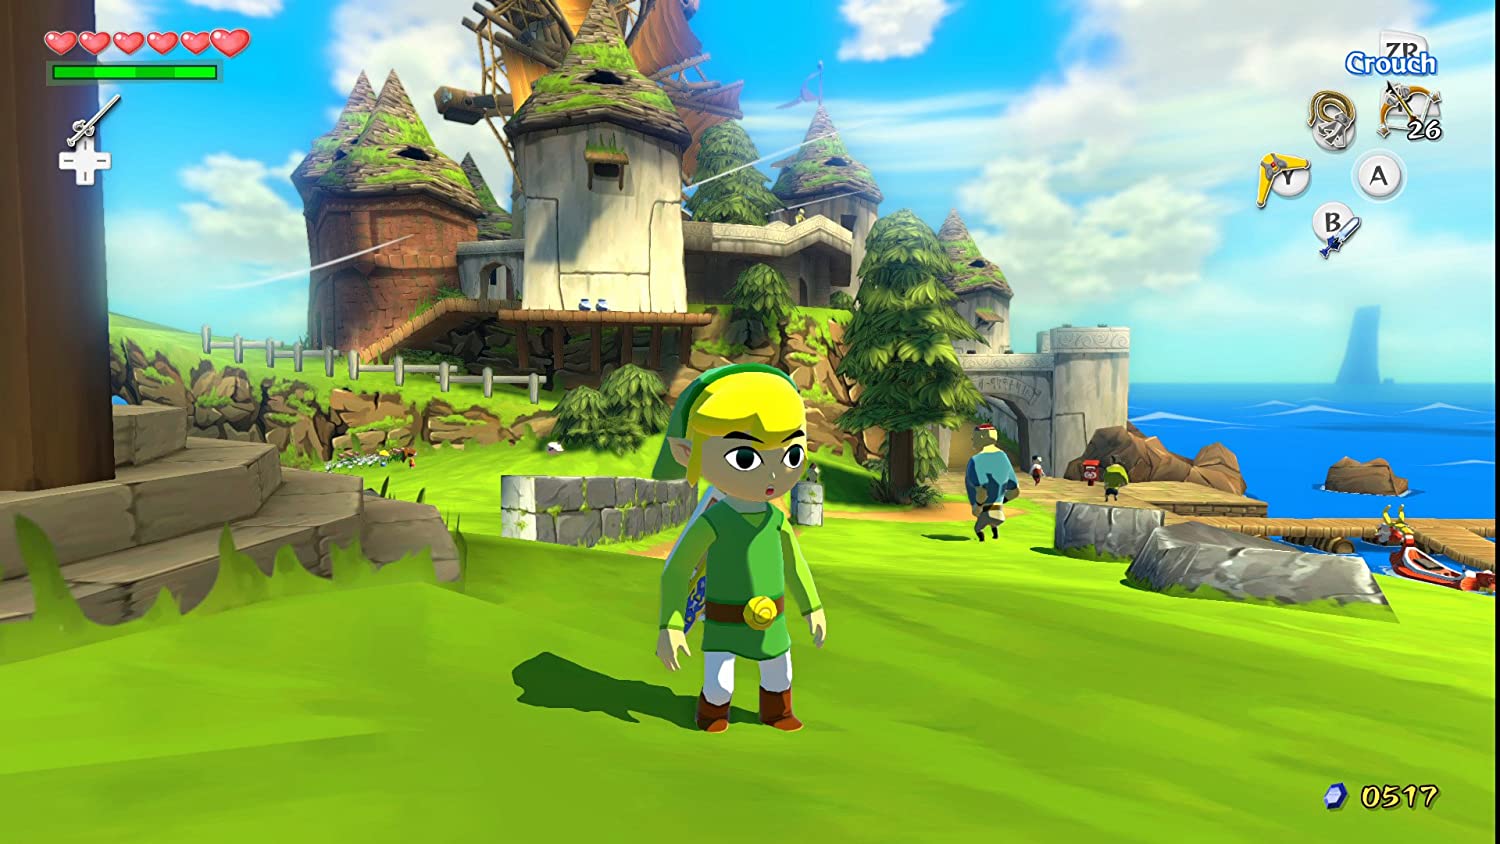 Zelda: Twilight Princess and Wind Waker Switch Ports to Release This Year  Alongside Metroid Prime Remastered, Grubb Believes, zelda wind waker rom pt  br